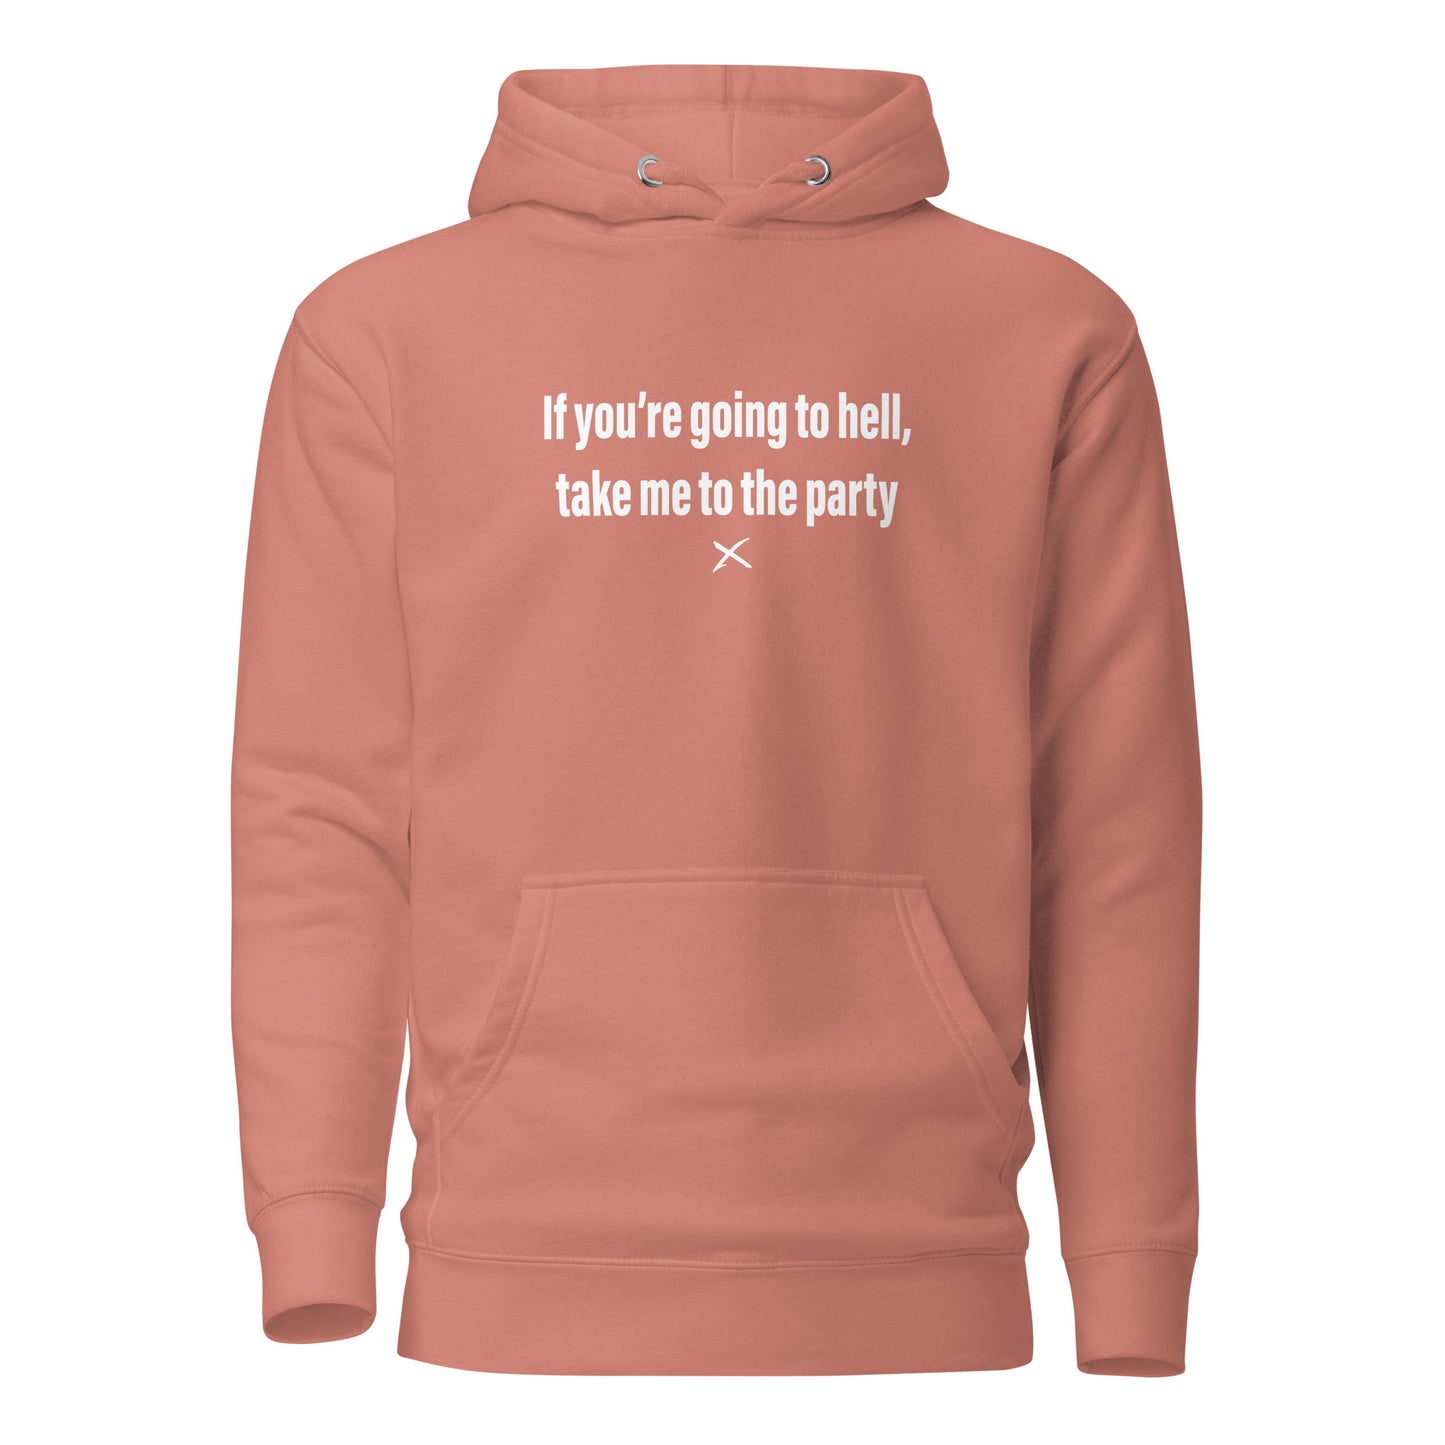 If you're going to hell, take me to the party - Hoodie